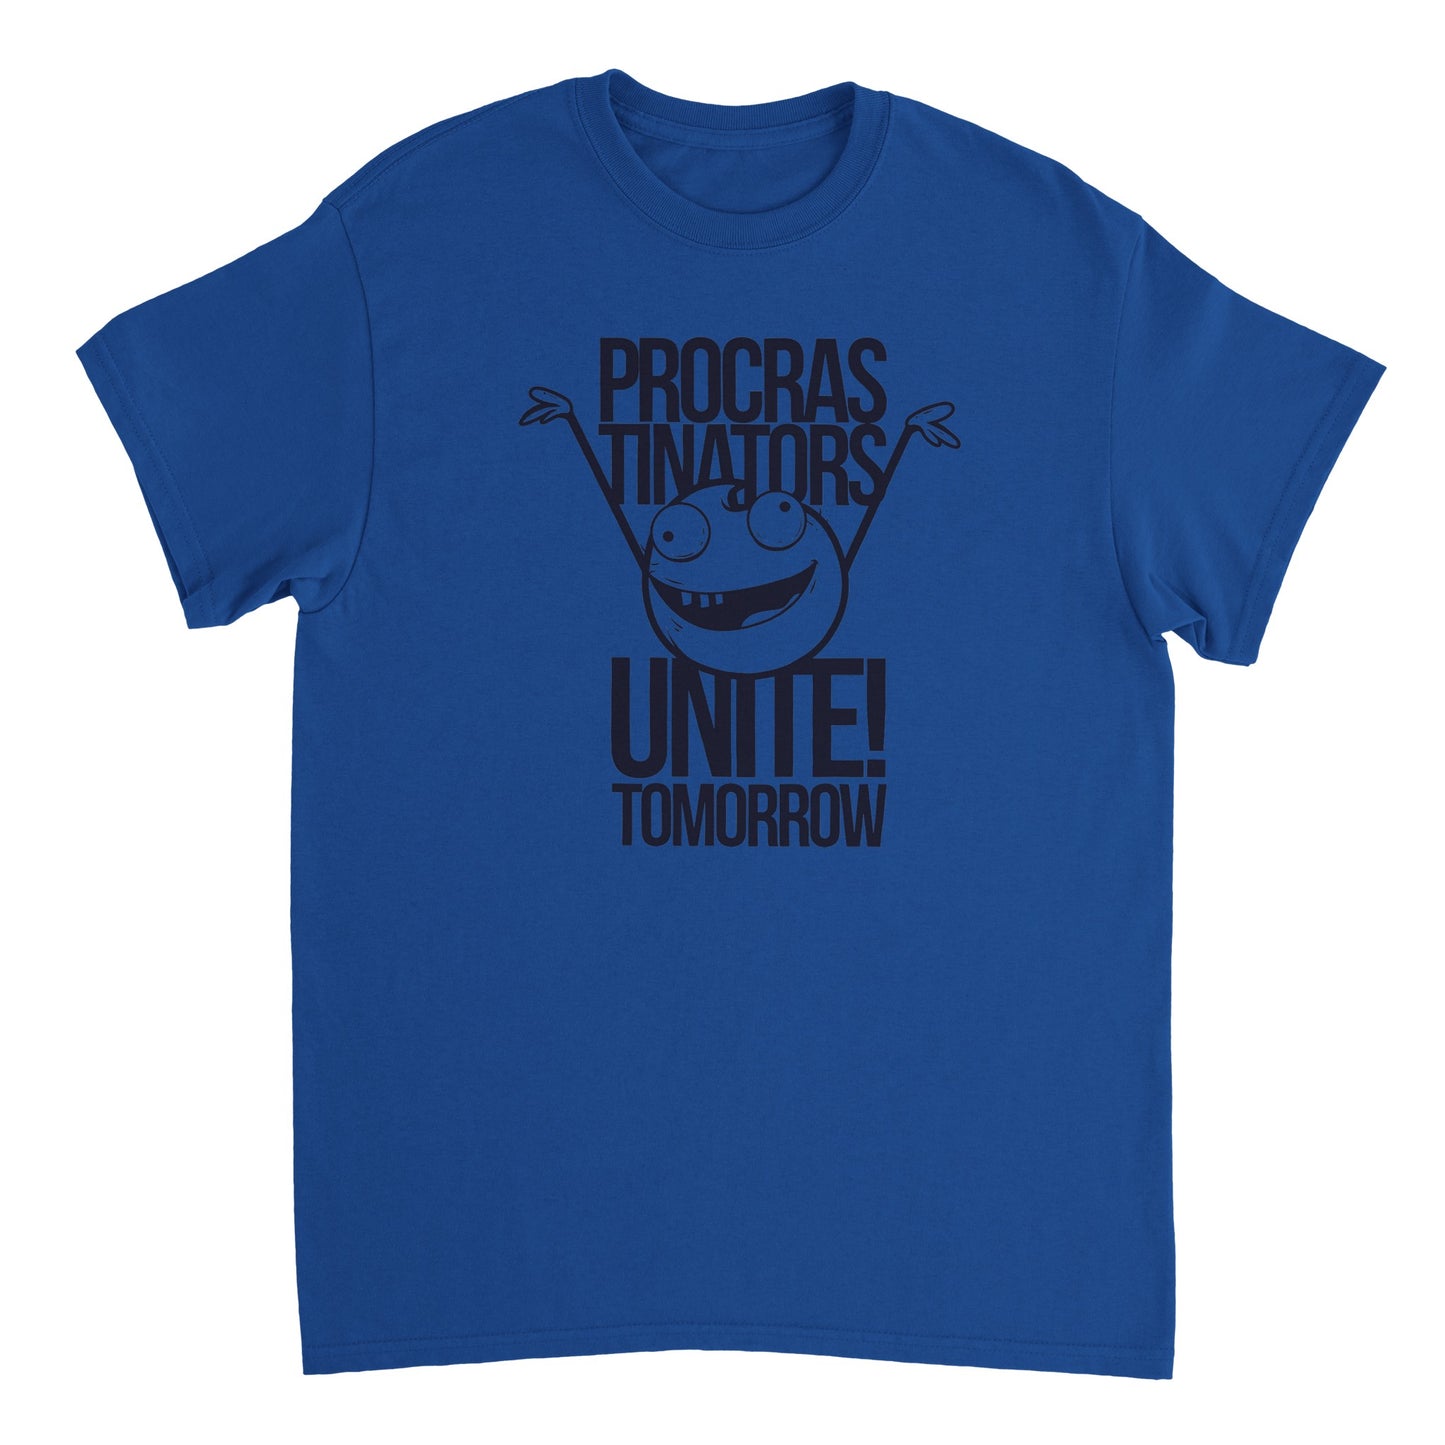 a blue t - shirt with the words procras triverts united tomorrow